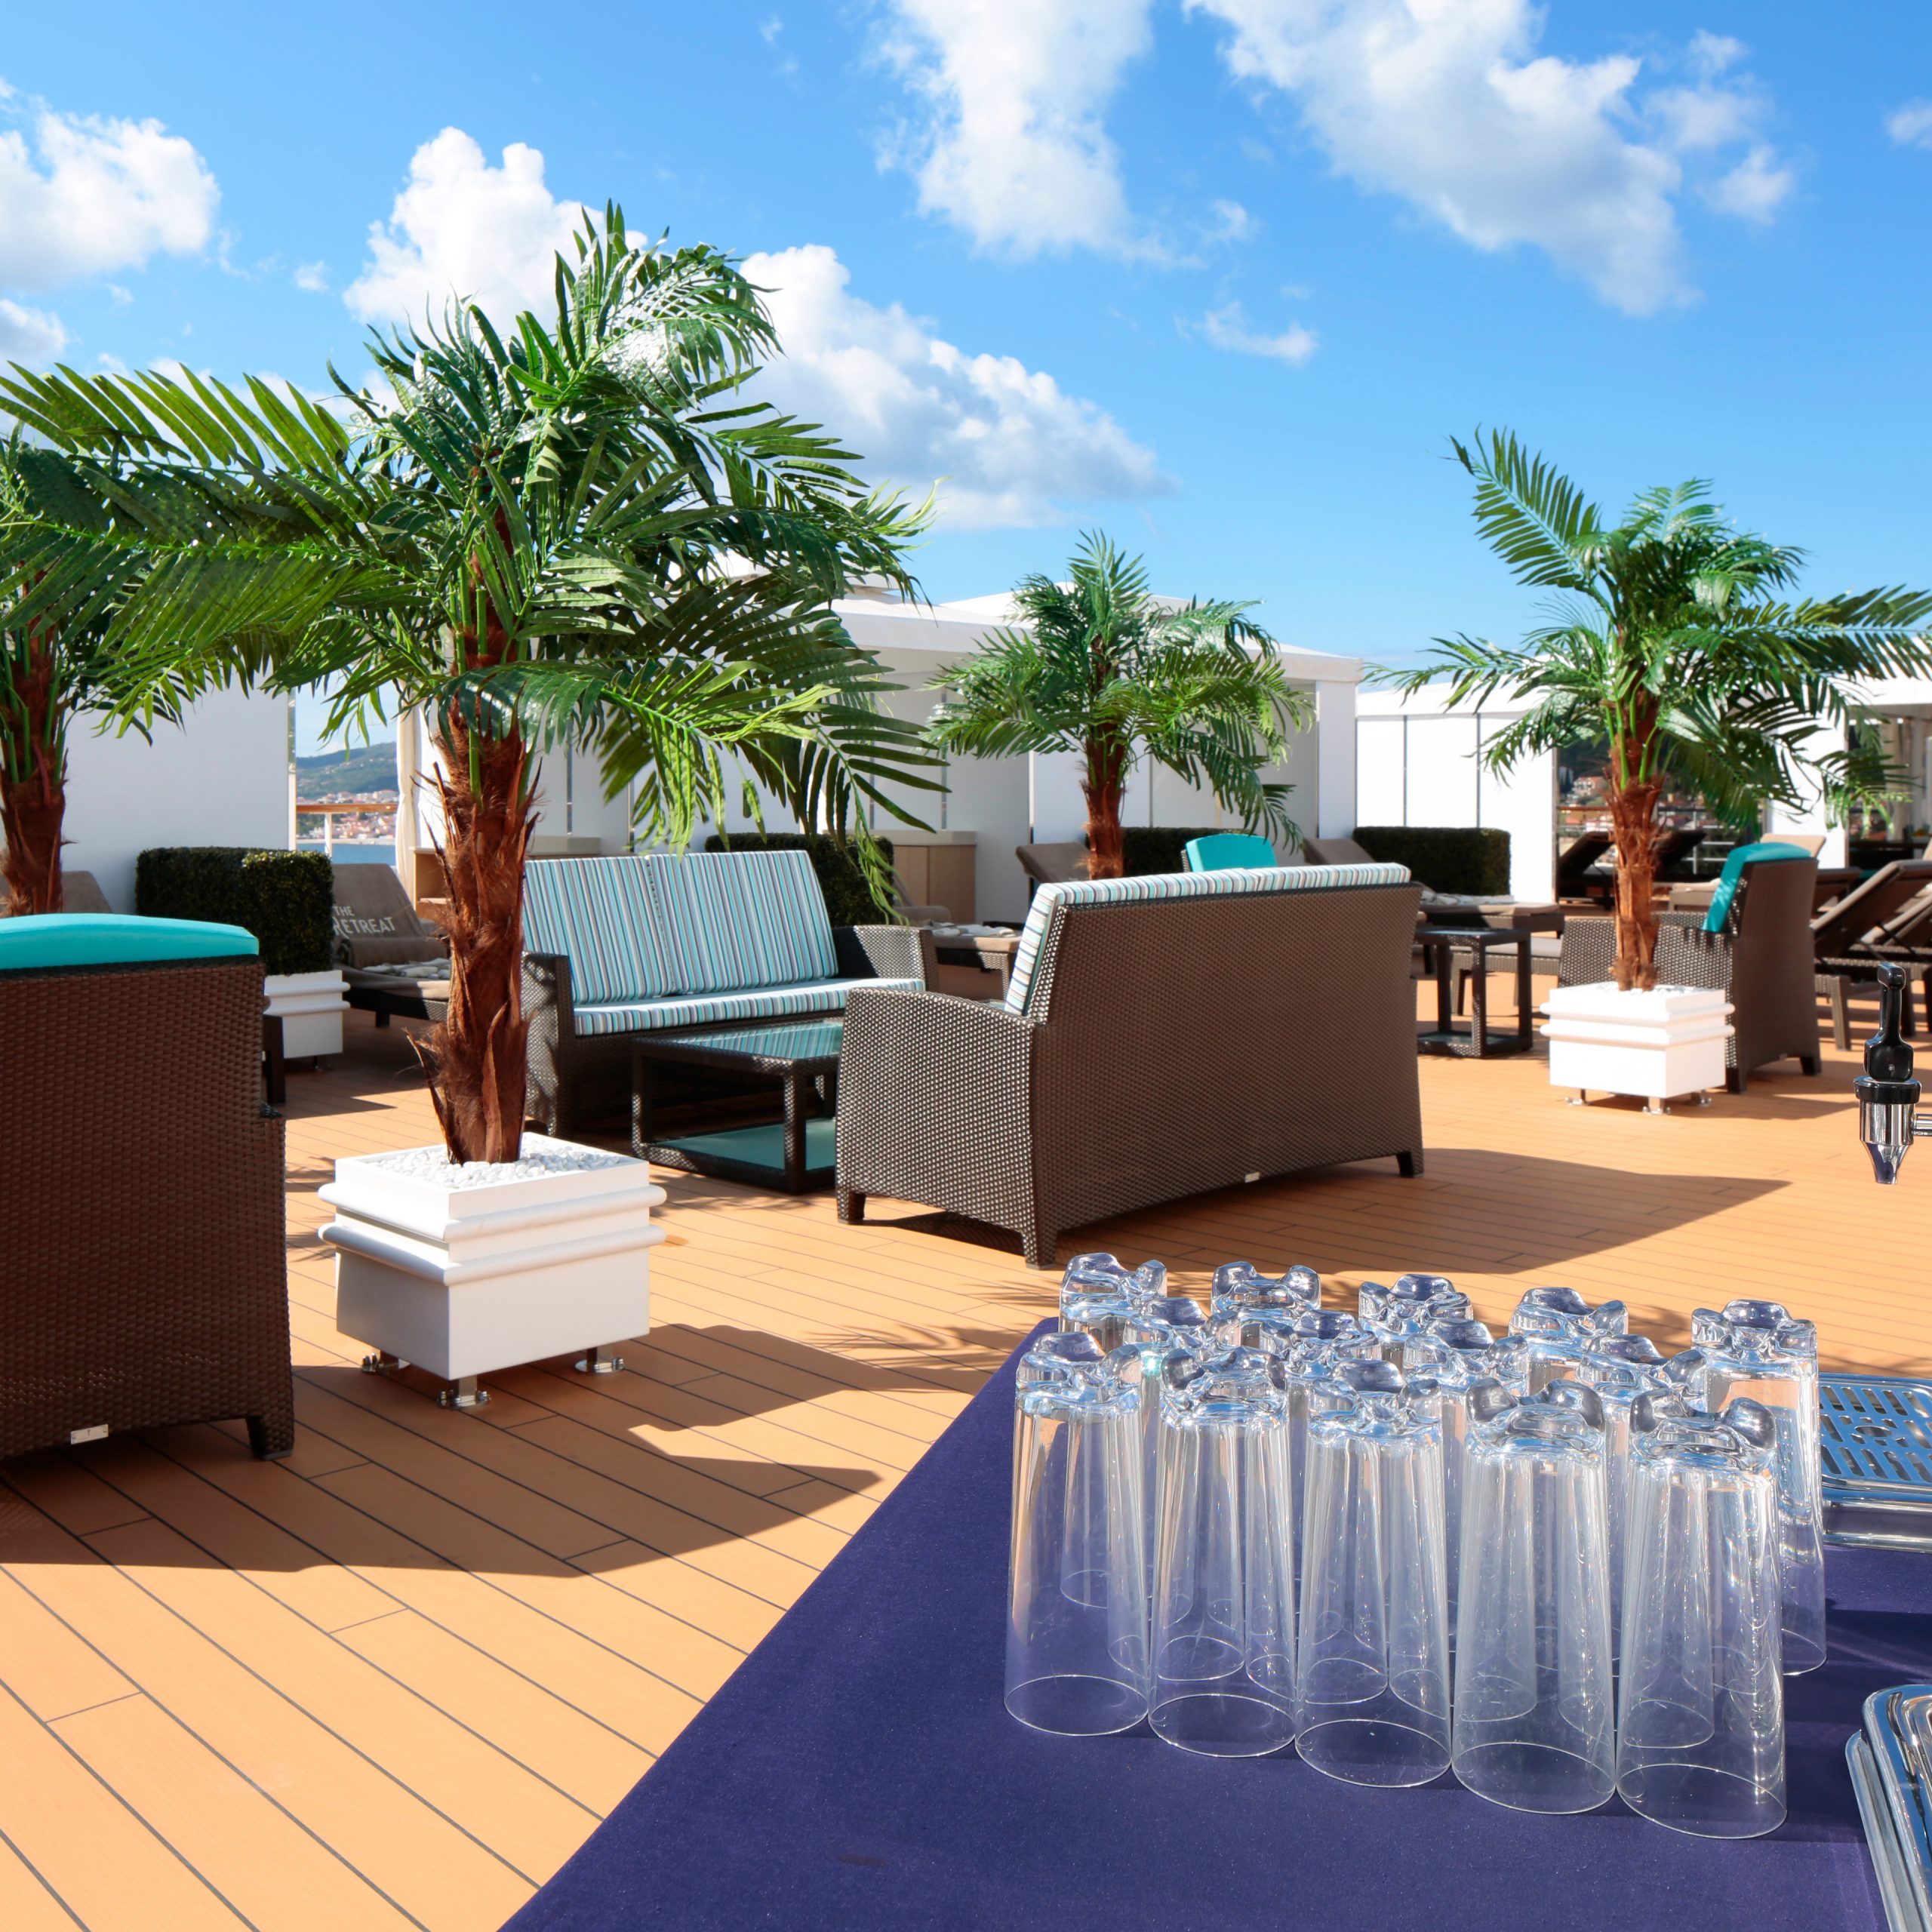 Relaxed seating area on deck of cruise ship Westerdam with refreshments, seating and palm trees.